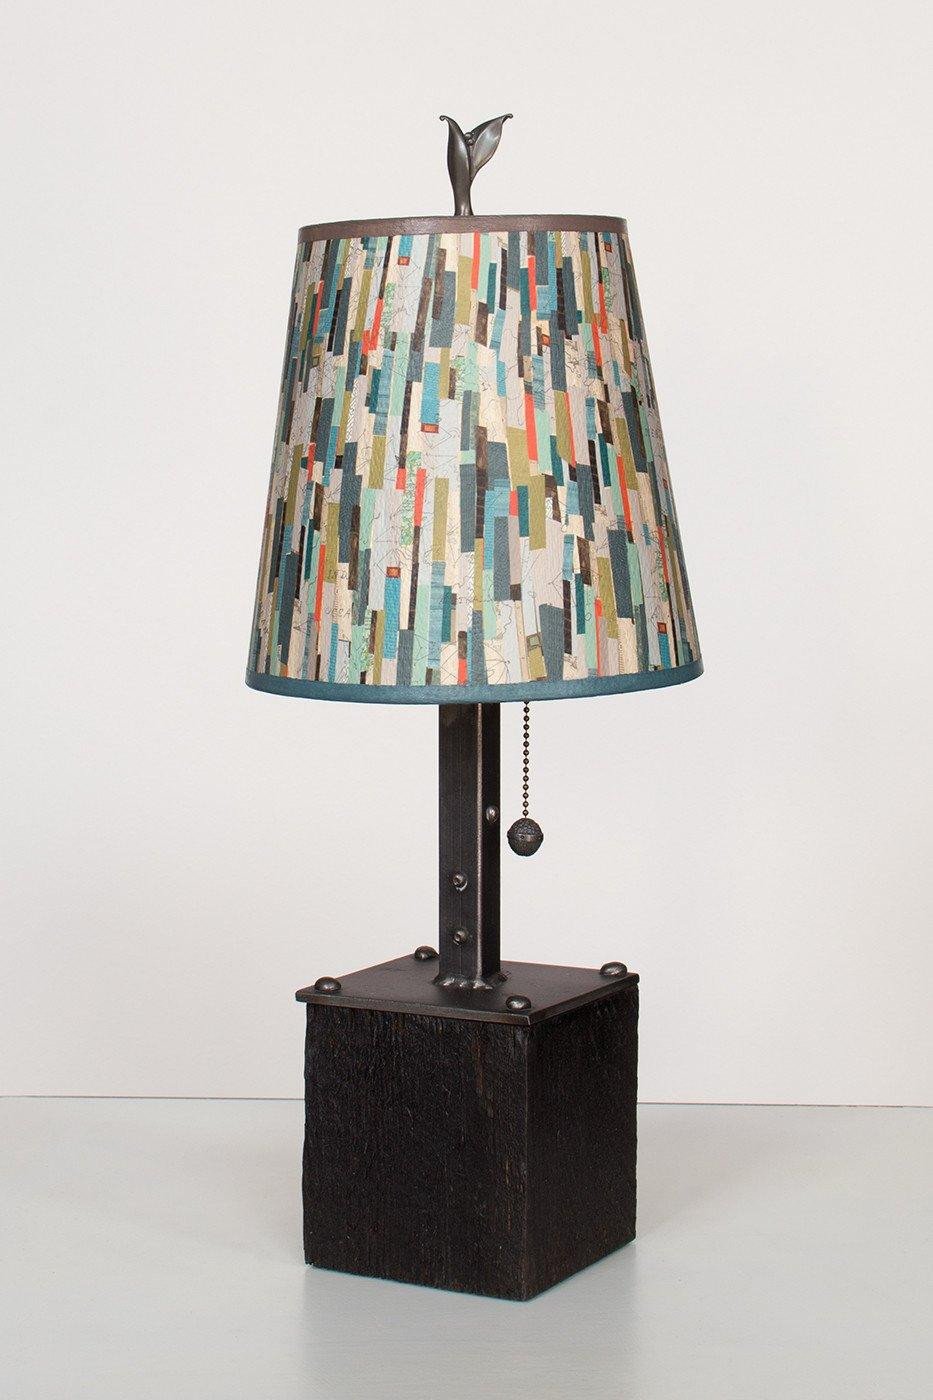 Steel Table Lamp on Reclaimed Wood with Small Drum Shade in Papers Lit